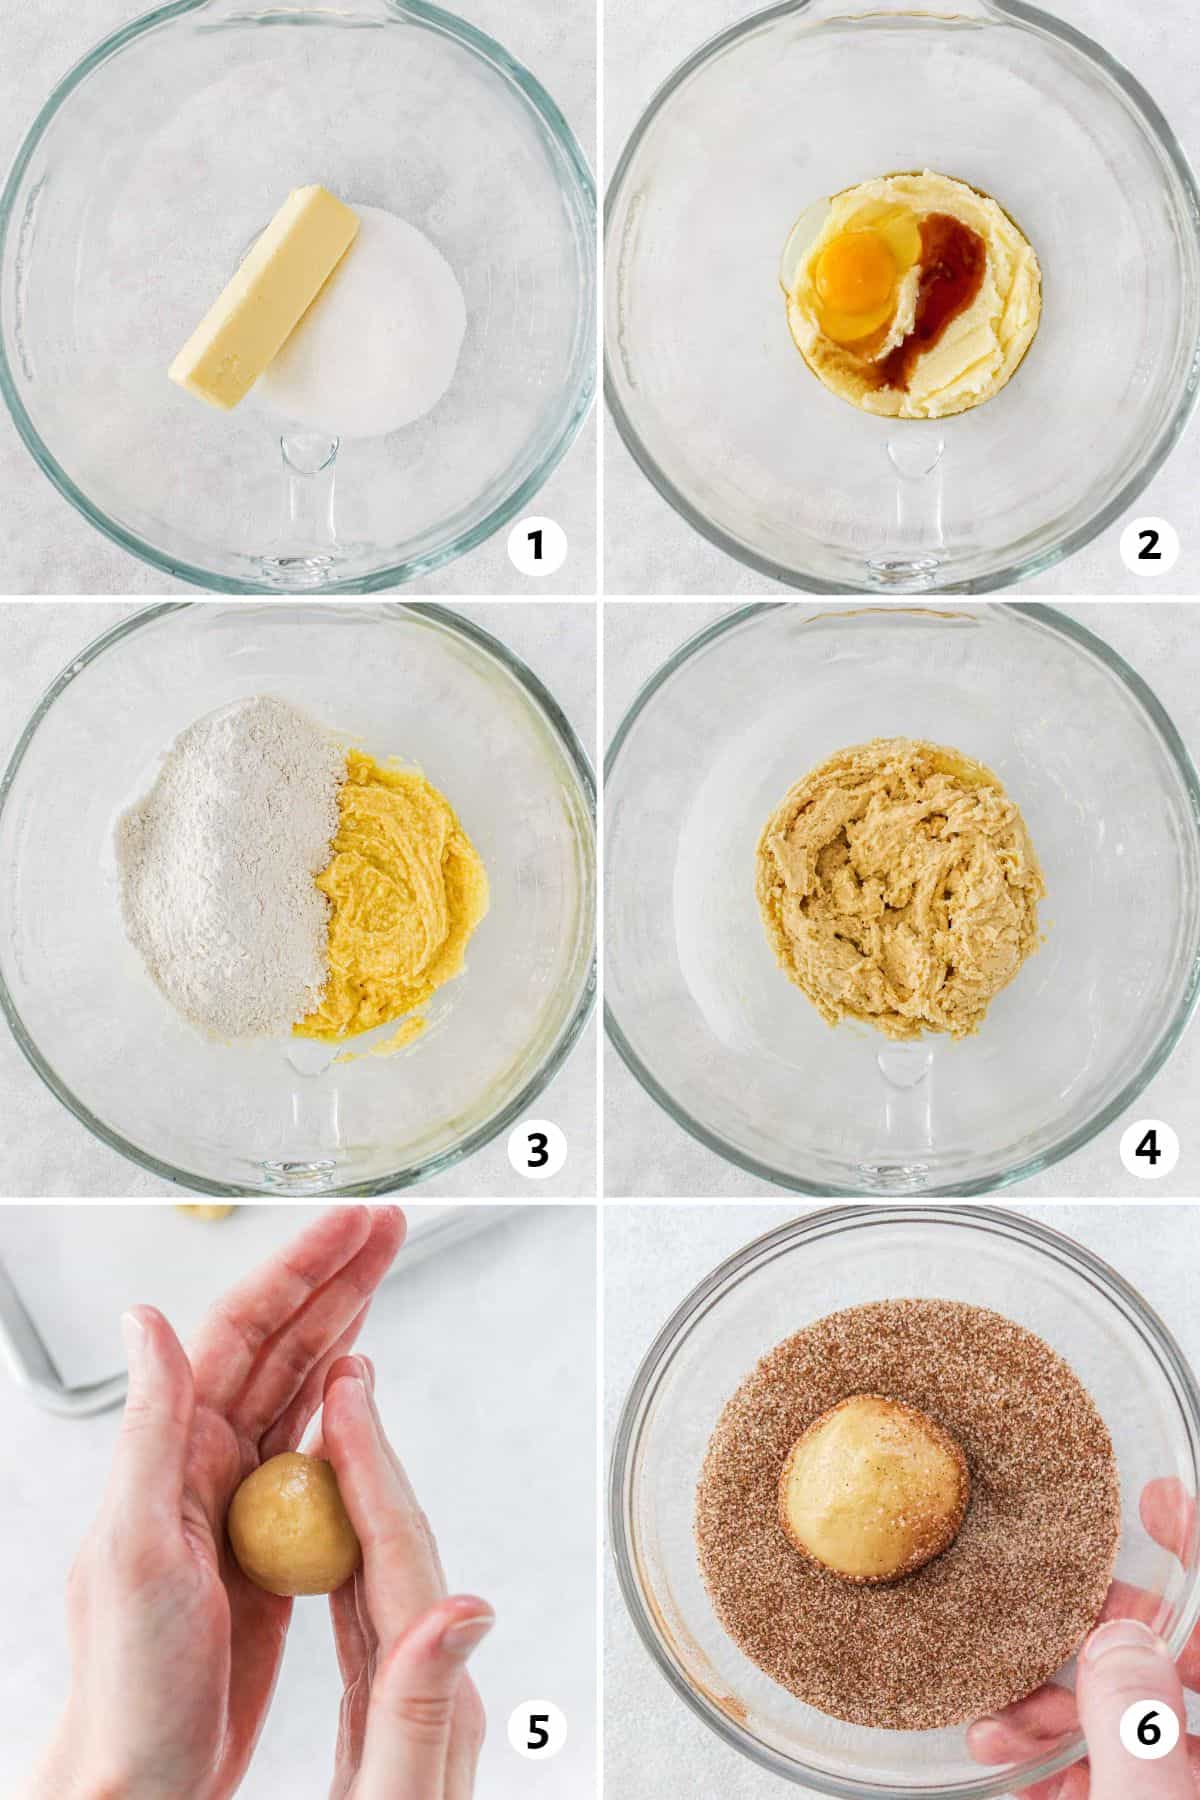 6 image collage making recipe: 1- butter and sugar before creaming together, 2- after creaming with an egg and vanilla added, 3- after combining with flour added on top, 4- after combined, 5- hand rolling a cookie dough ball between palms, 6- rolling cookie dough ball in cinnamon sugar.